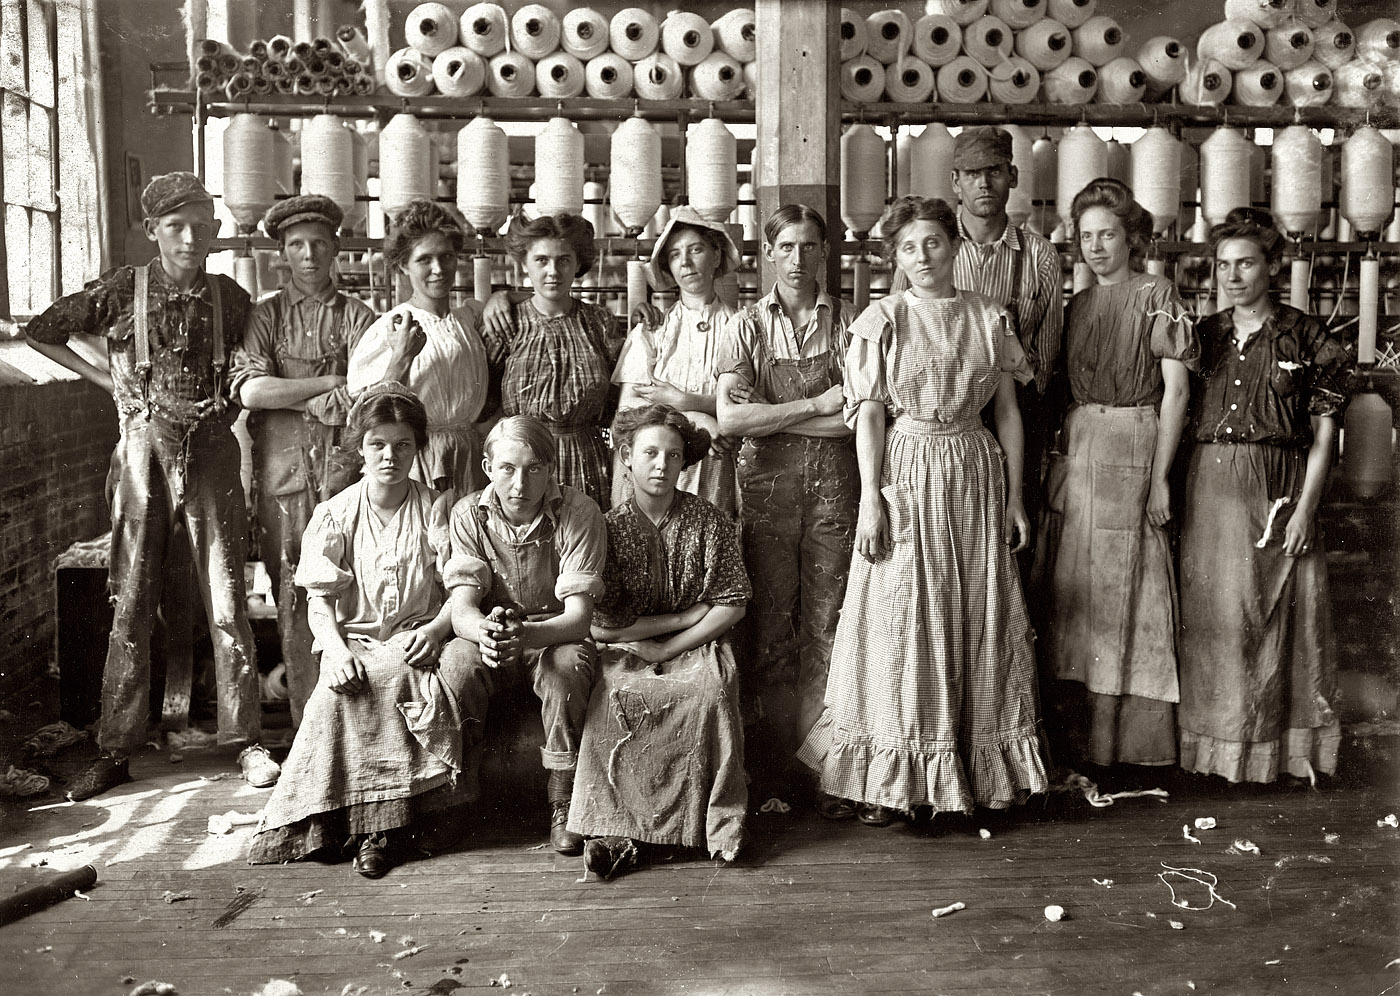 The workplace of 100 years ago. "Operatives in Indianapolis Cotton Mill. Noon Hour. August 1908." View full size. Photograph by Lewis Wickes Hine.